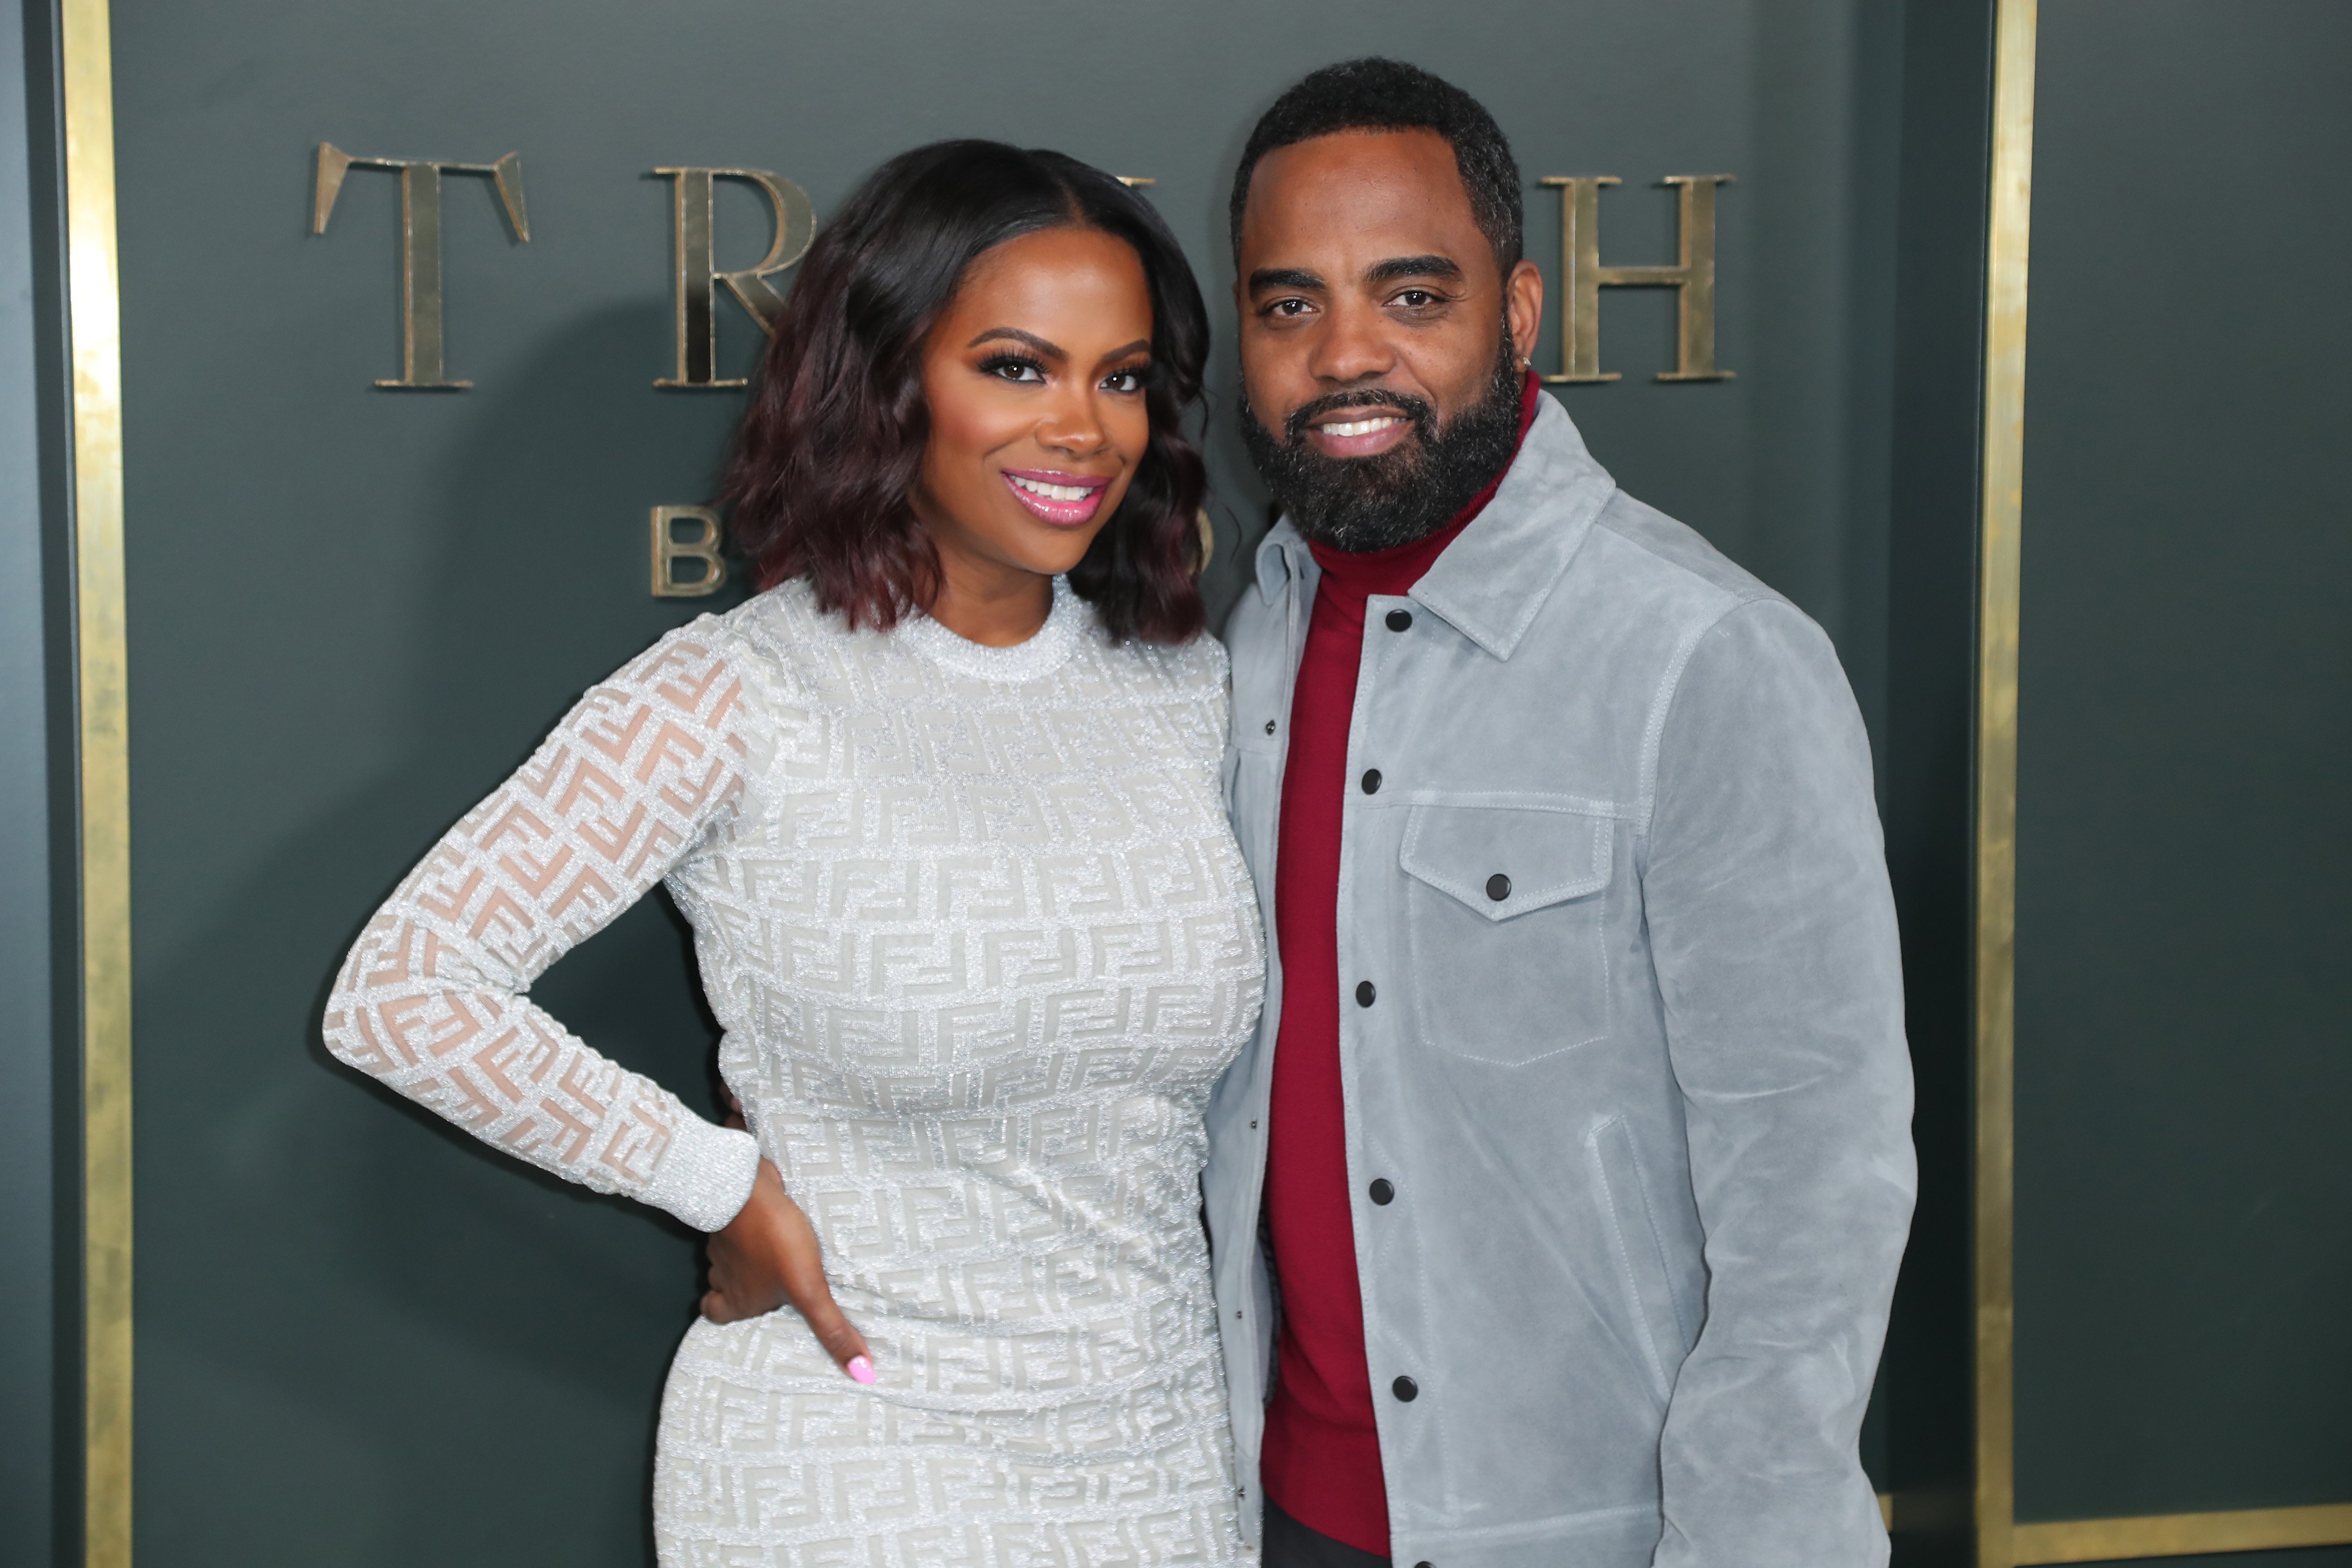 Kandi Burruss and Todd Tucker attend Premiere Of Apple TV+'s "Truth Be Told" at AMPAS Samuel Goldwyn Theater on November 11, 2019 in Beverly Hills, California | Photo: GettyImages